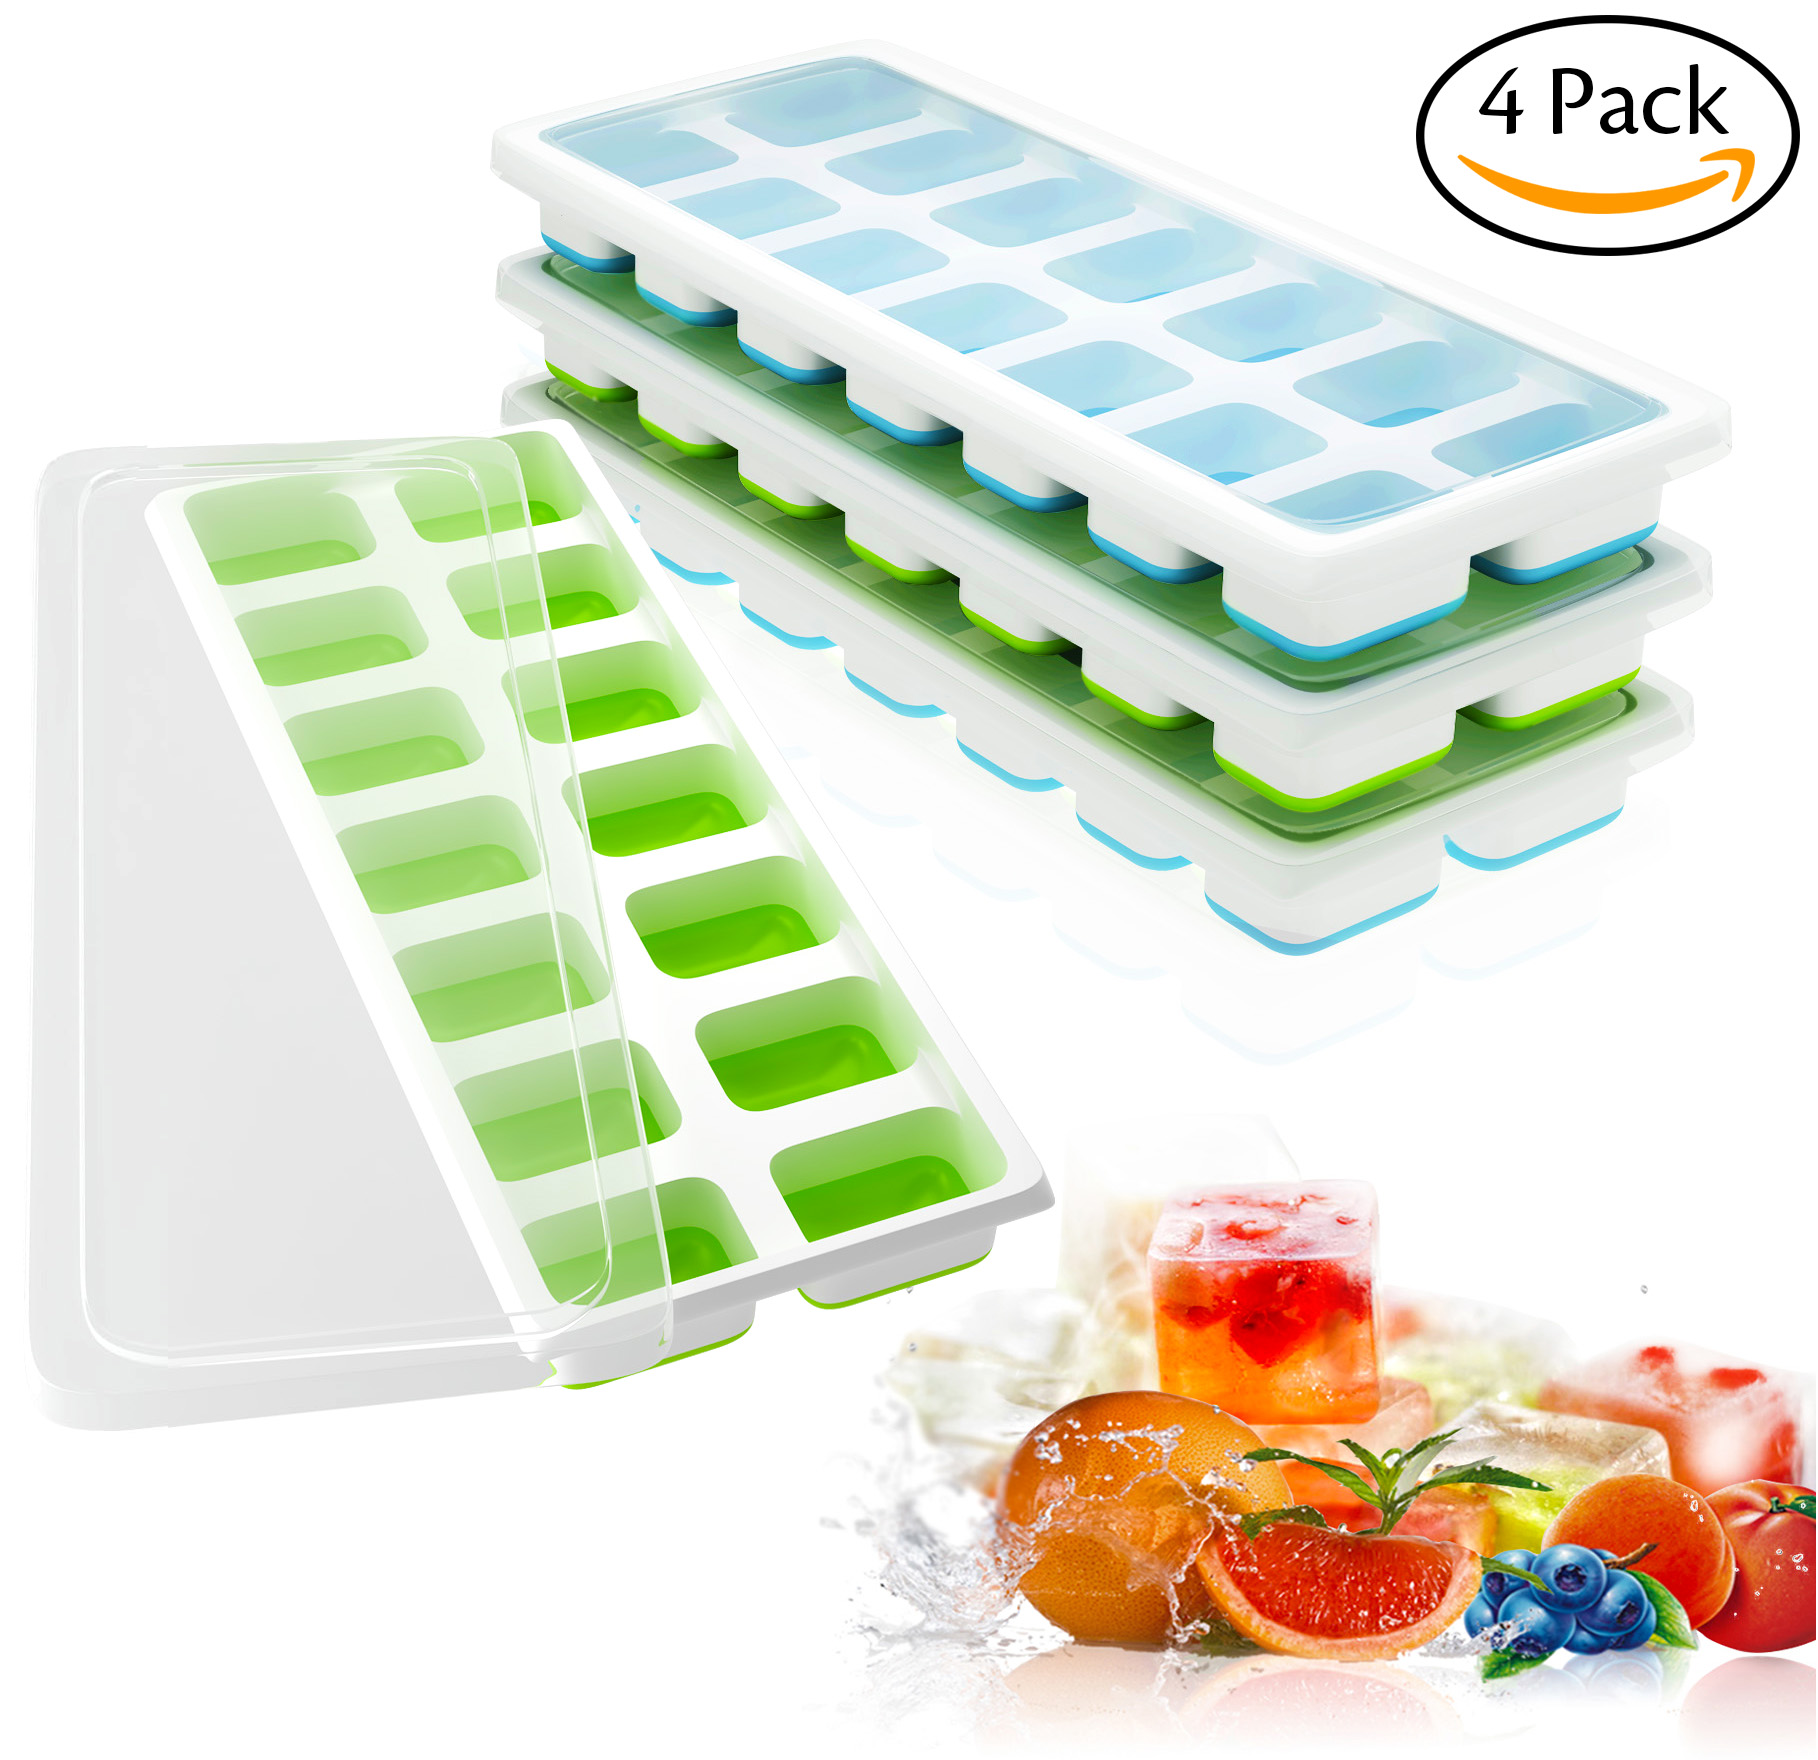 4 Pack Silicone Ice Cube Trays With Lid BPA Free 56-Ice Cubes